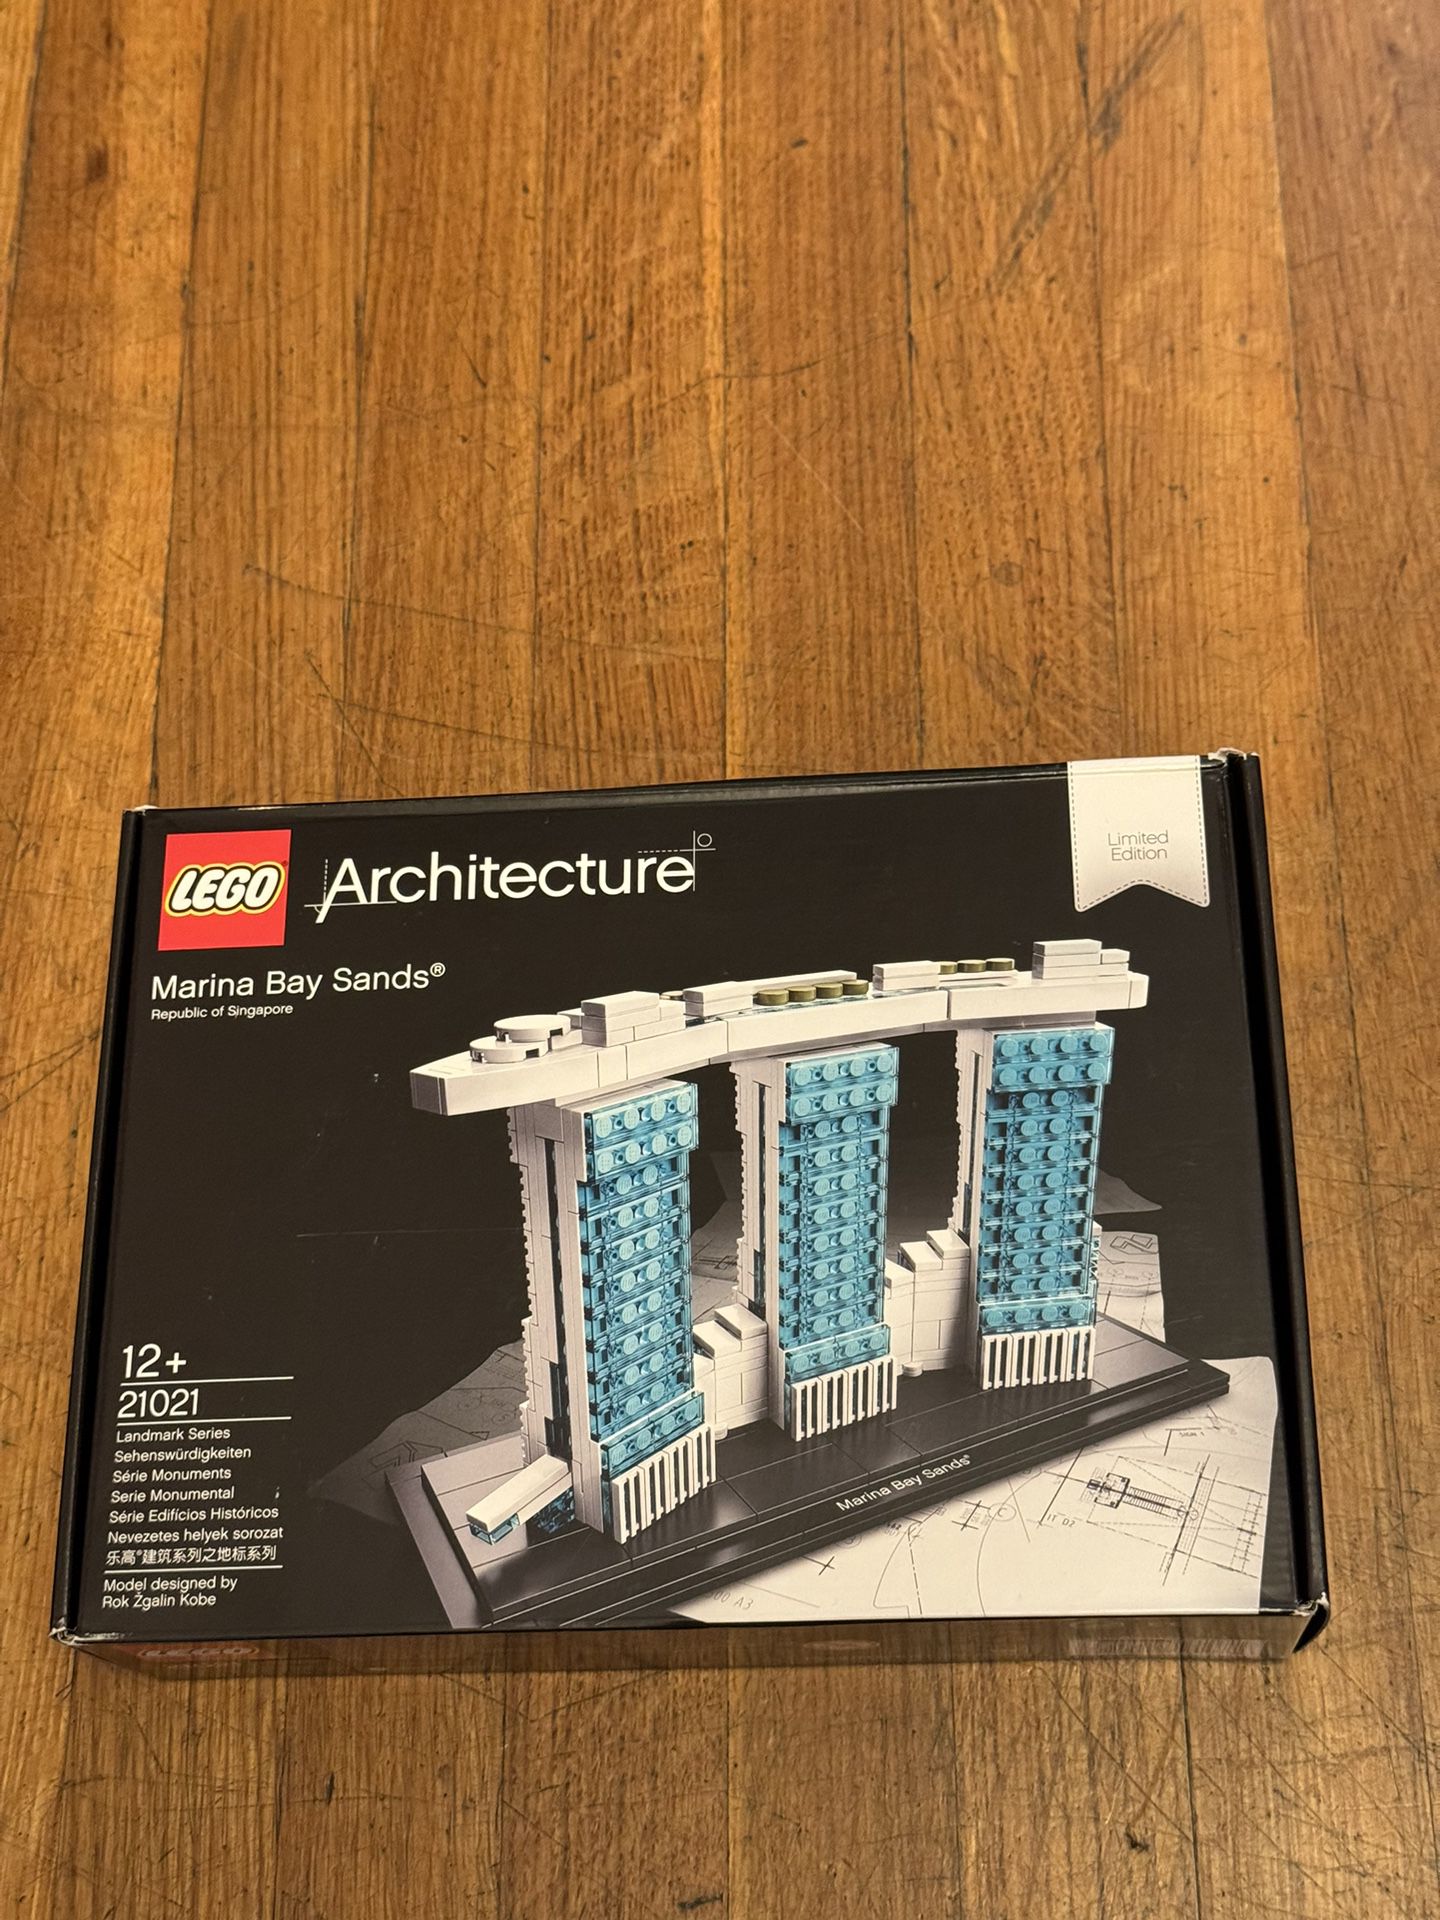 Lego Architecture Marina Bay Sands Republic of Singapore (21021) Limited Edition Brand new